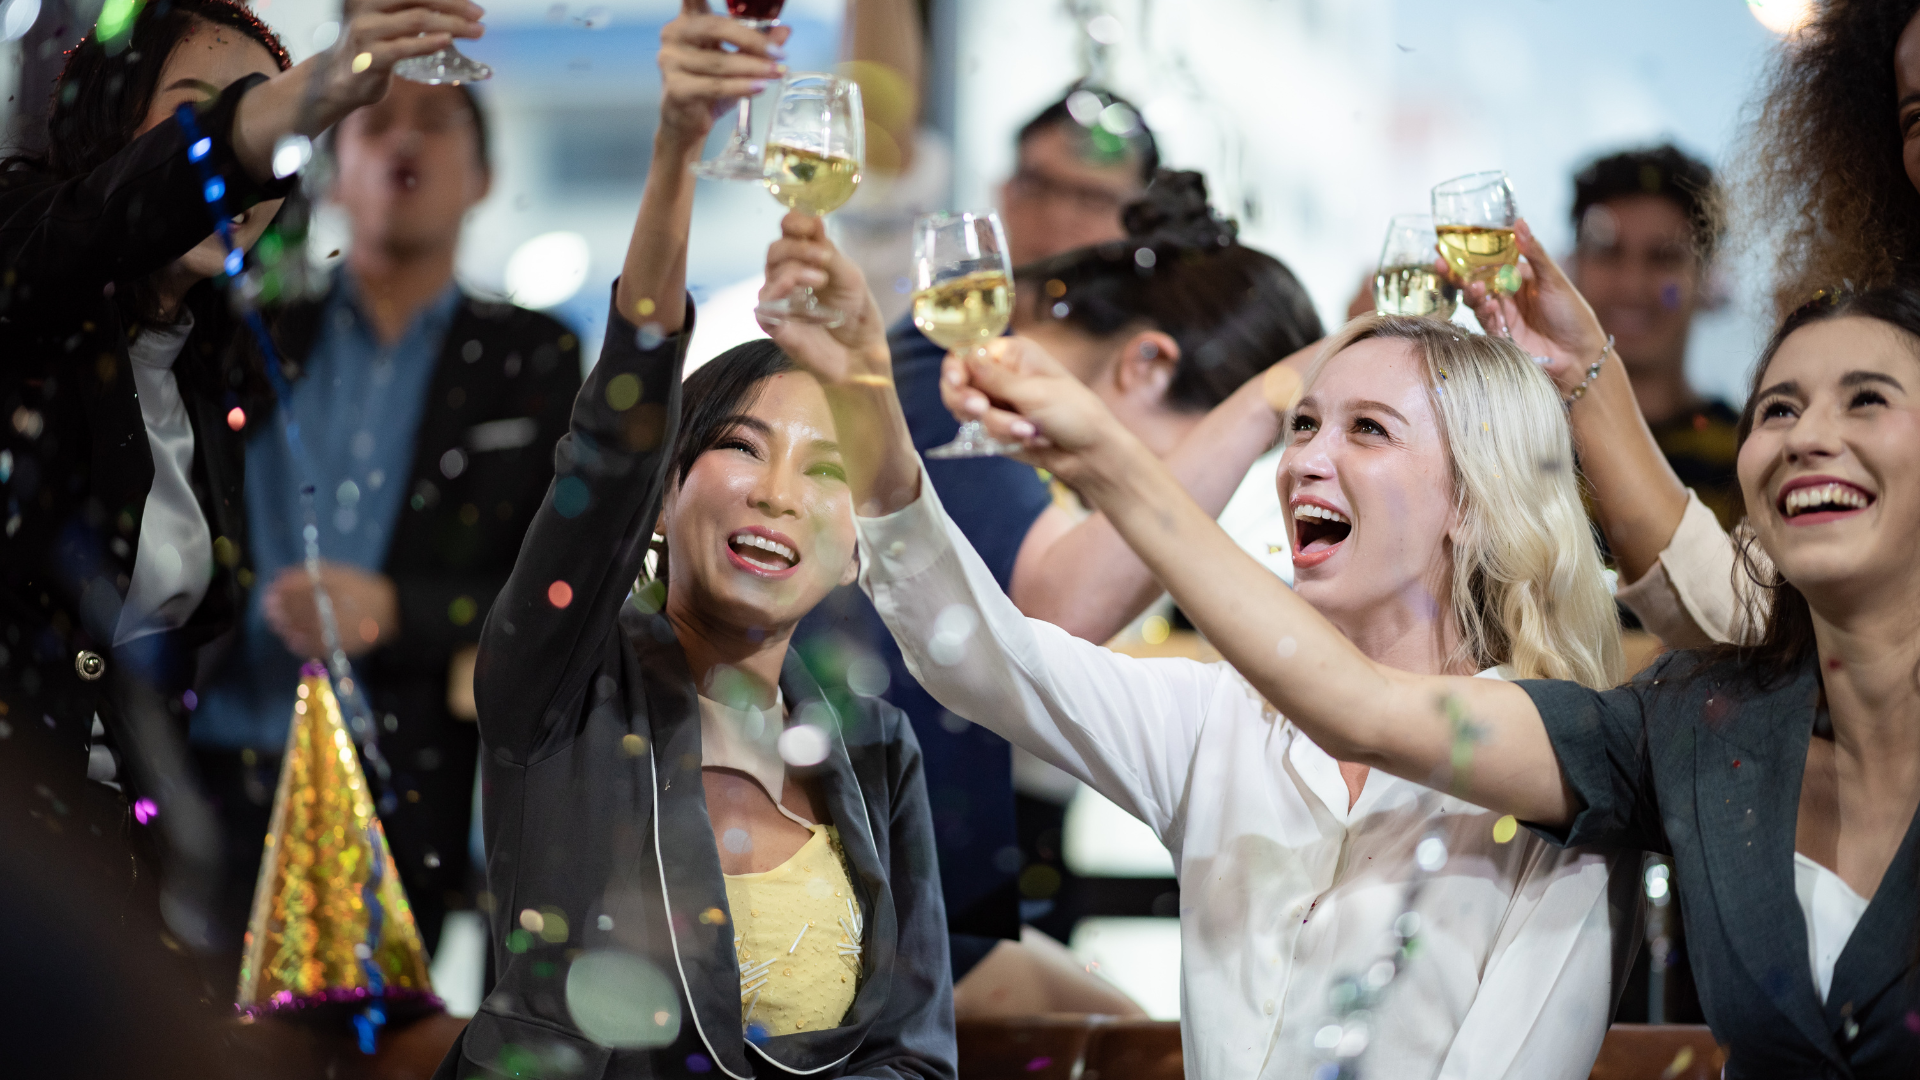 How to Deduct the Cost of a Business Party